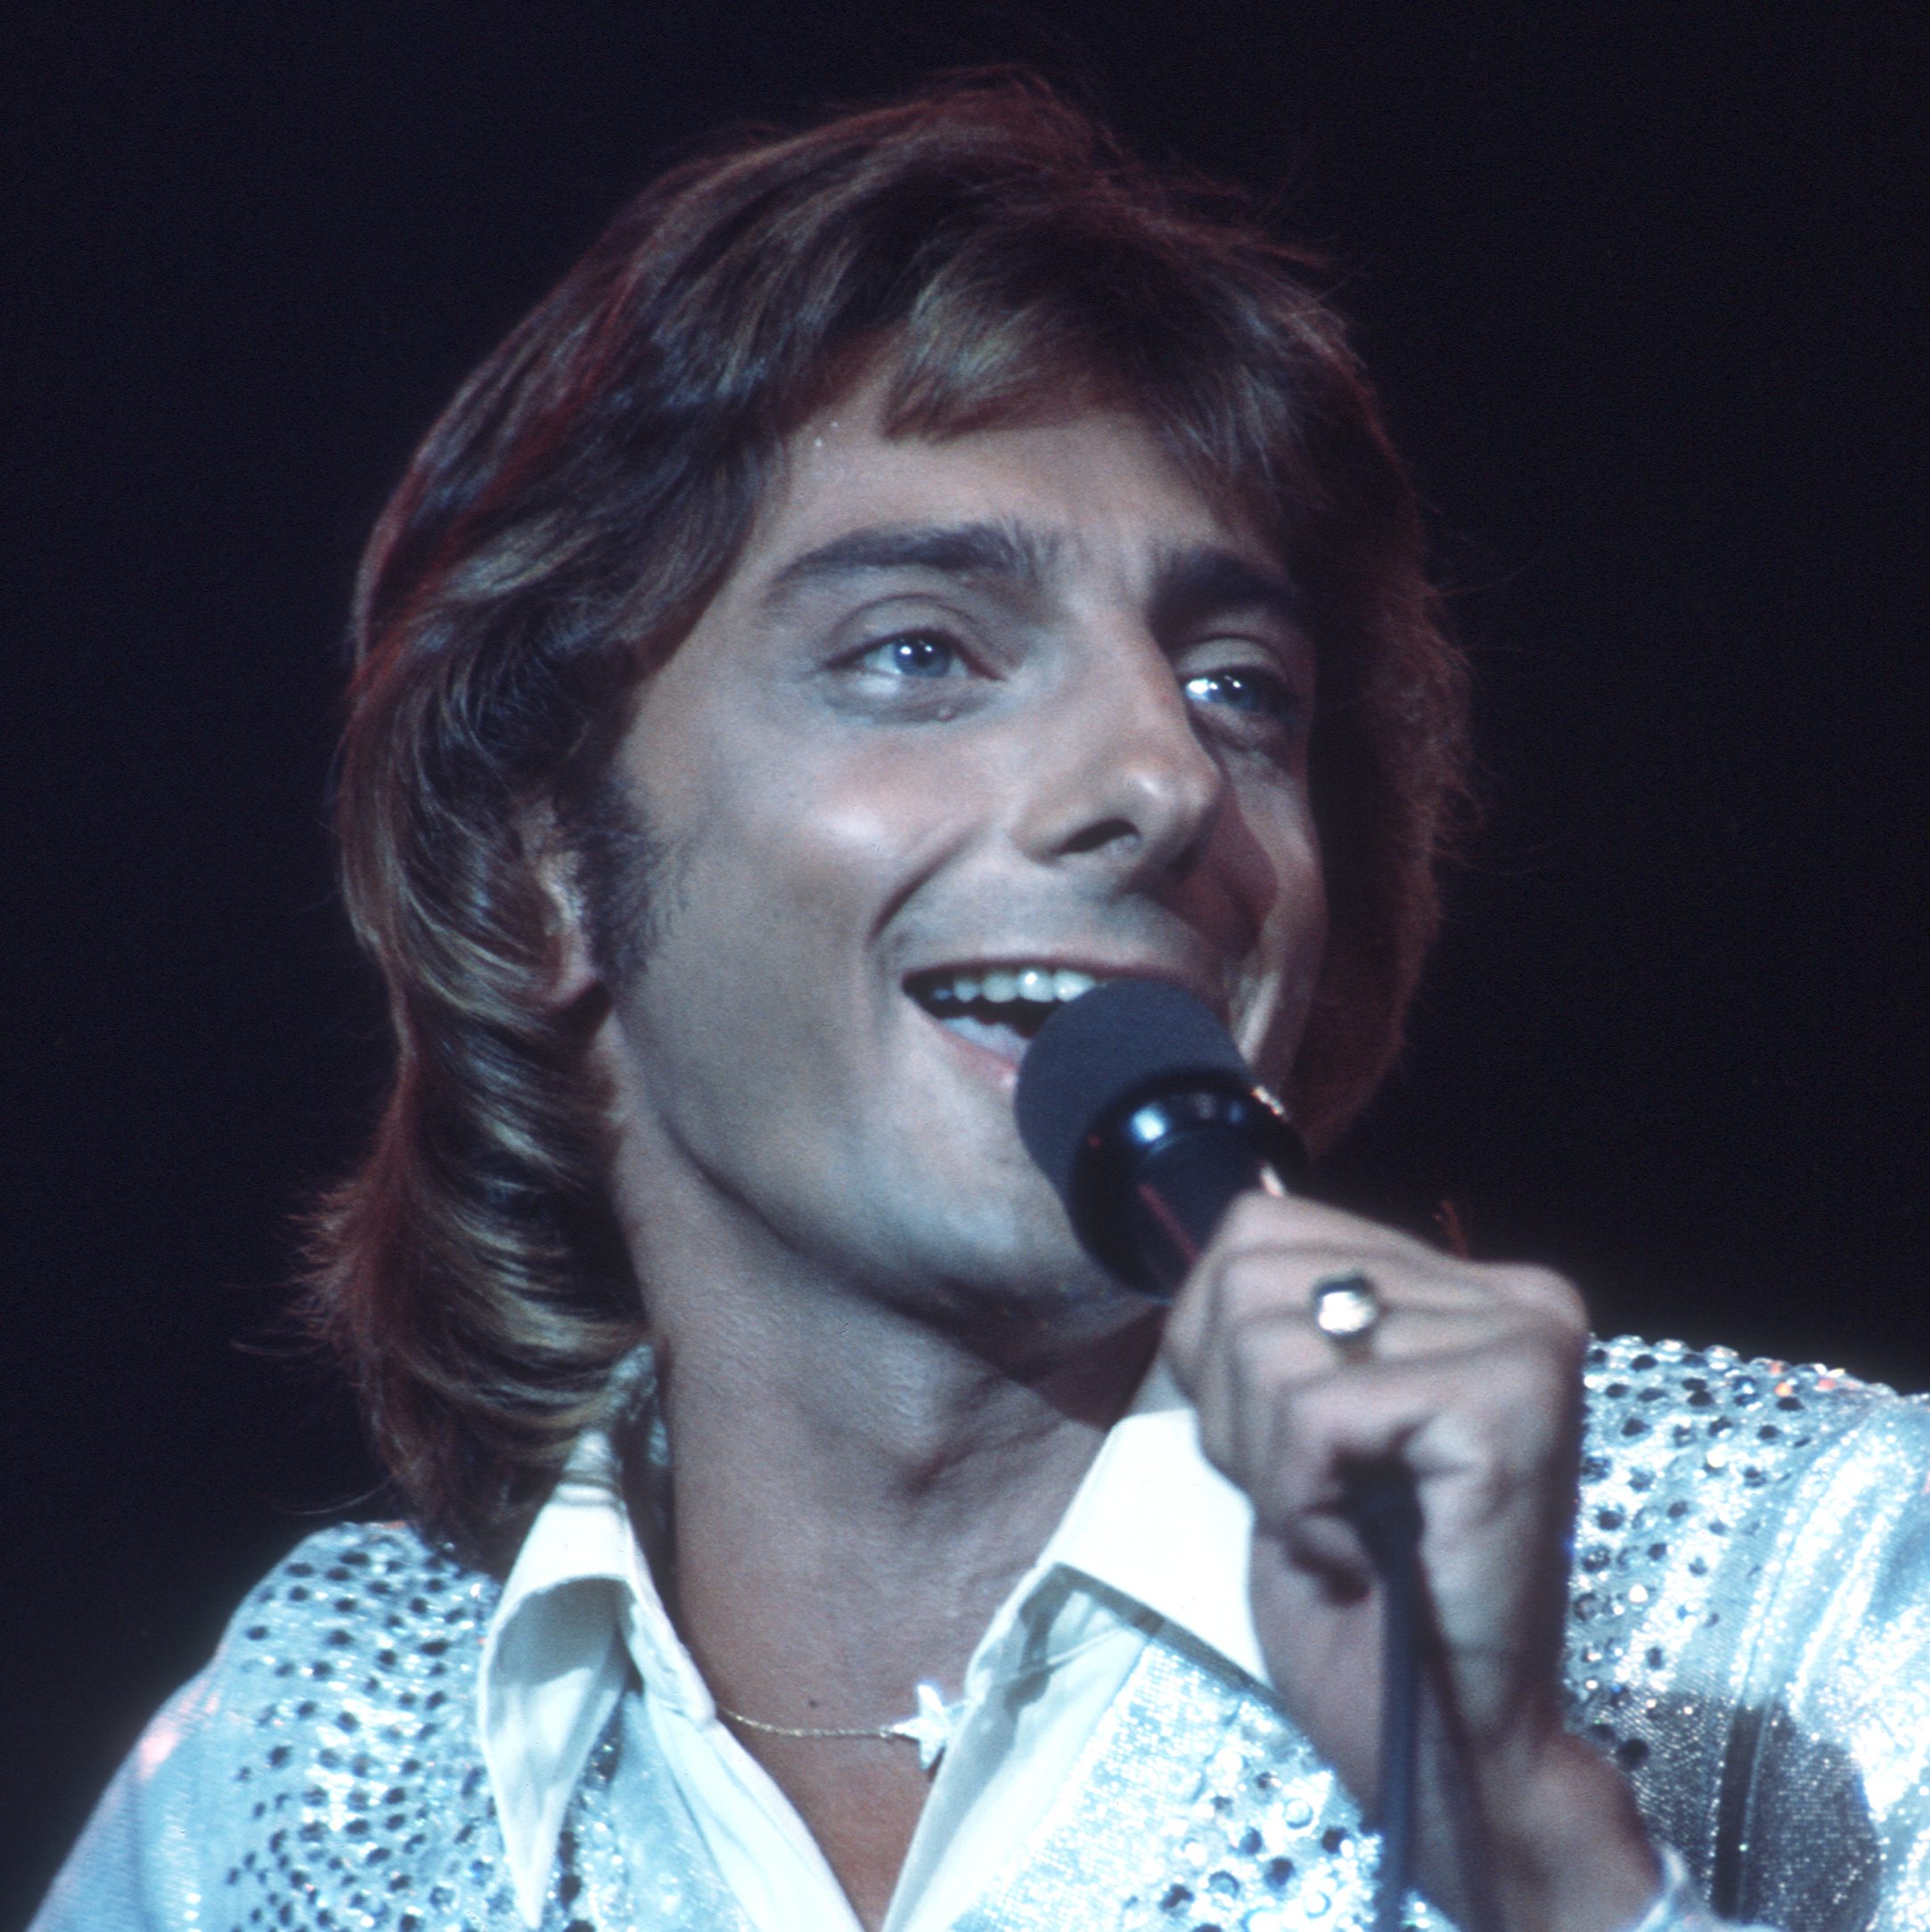 Barry Manilow performing in the 1970s